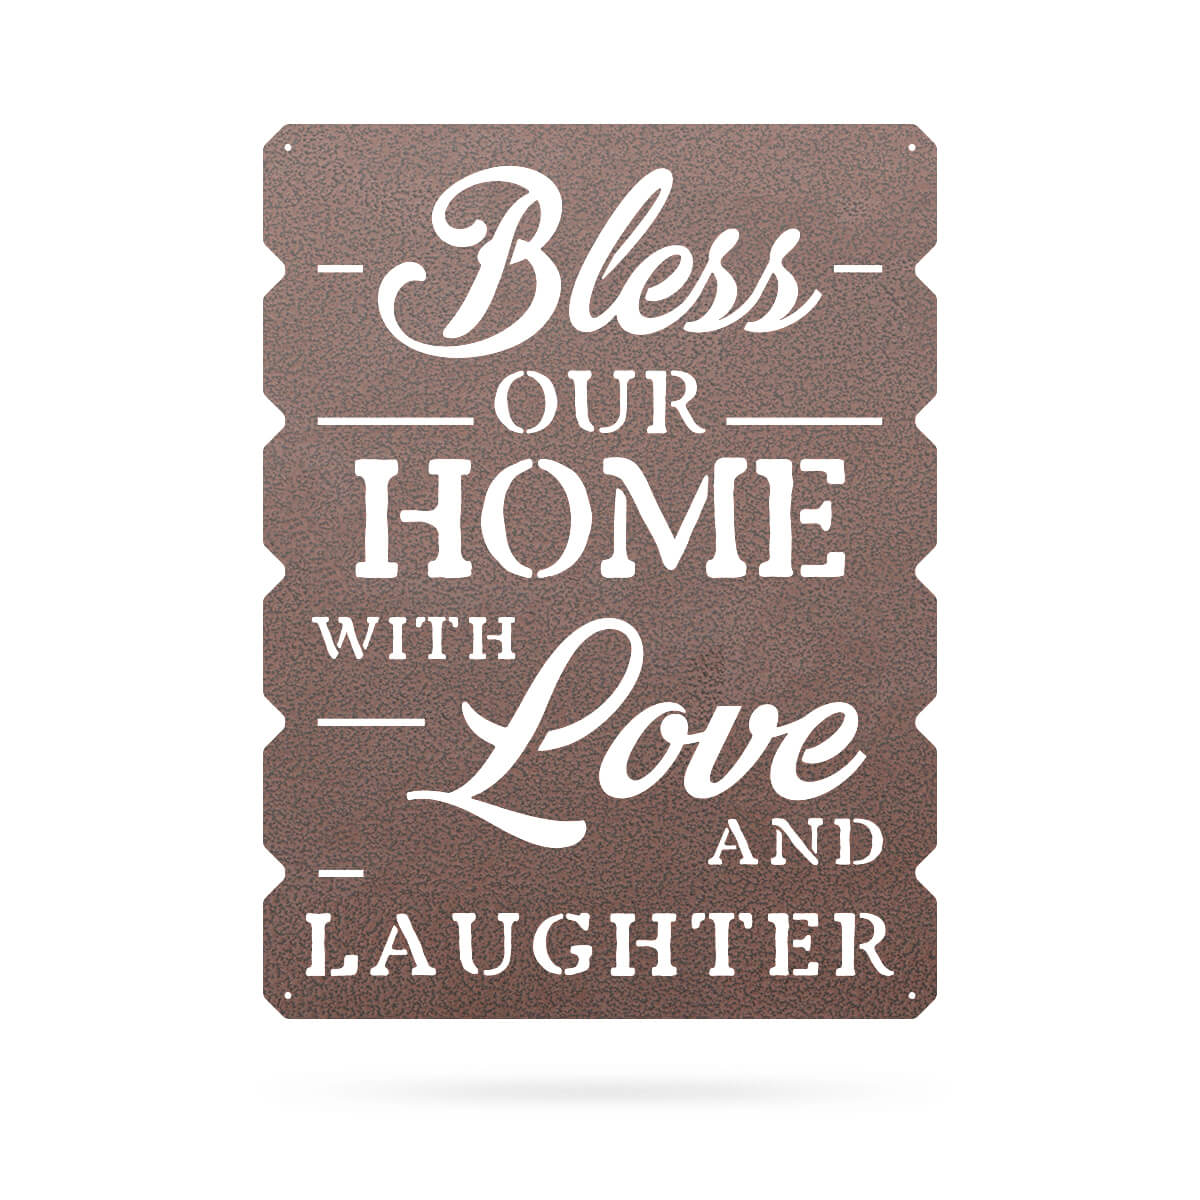 Bless Our Home Wall Art 18"x24" / Penny Vein - RealSteel Center